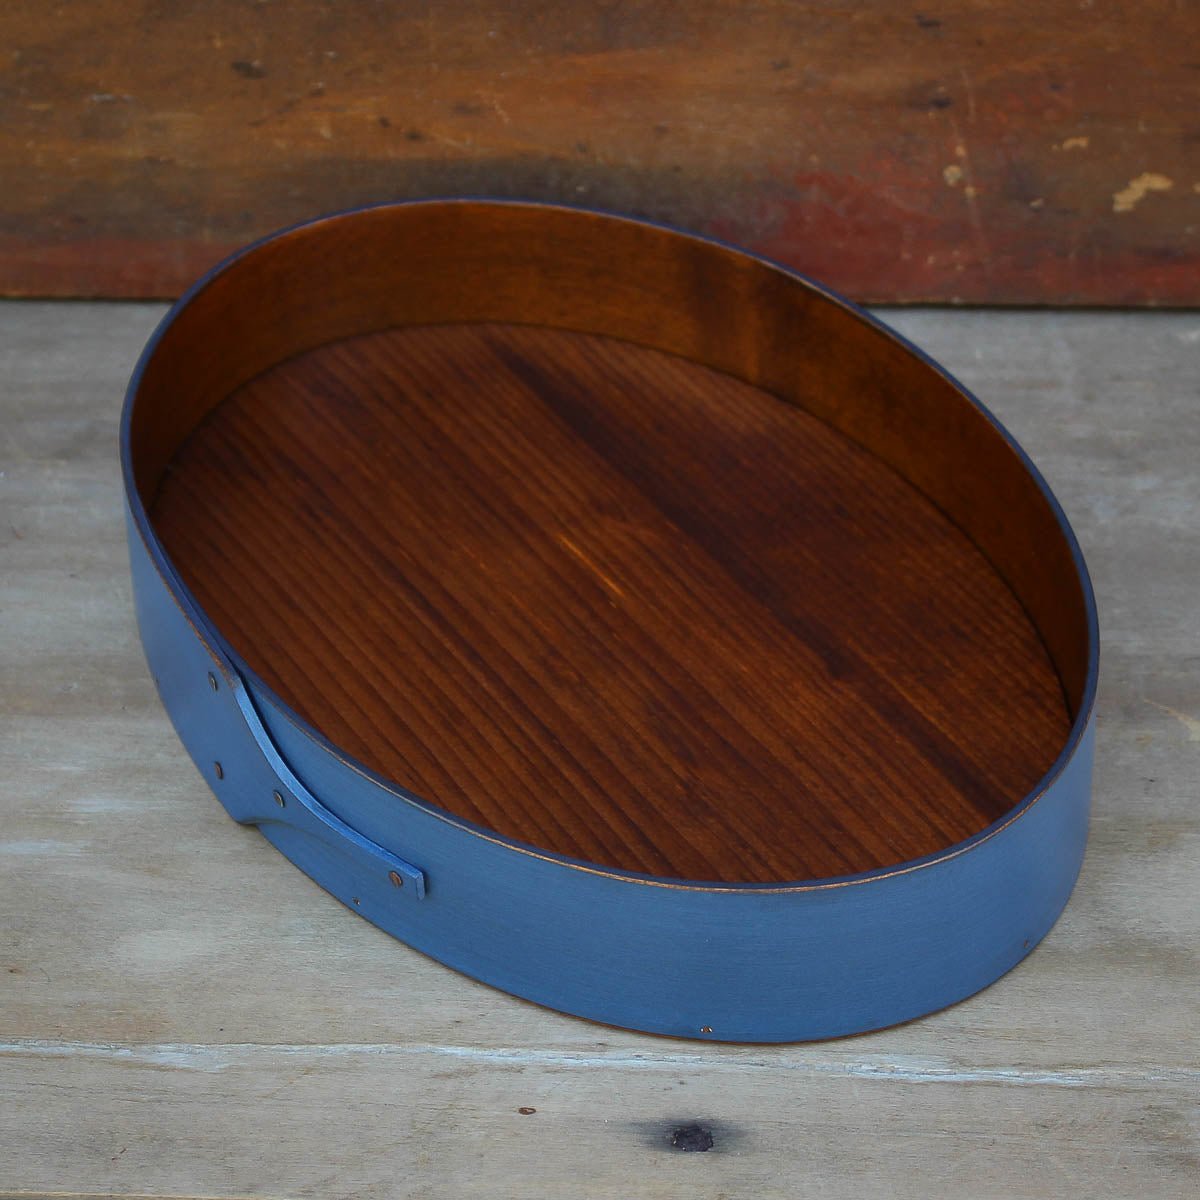 Shaker Style Oval Stitchers Tray, LeHays Shaker Boxes, Handcrafted in Maine, Blue Milk Paint Finish, Side View